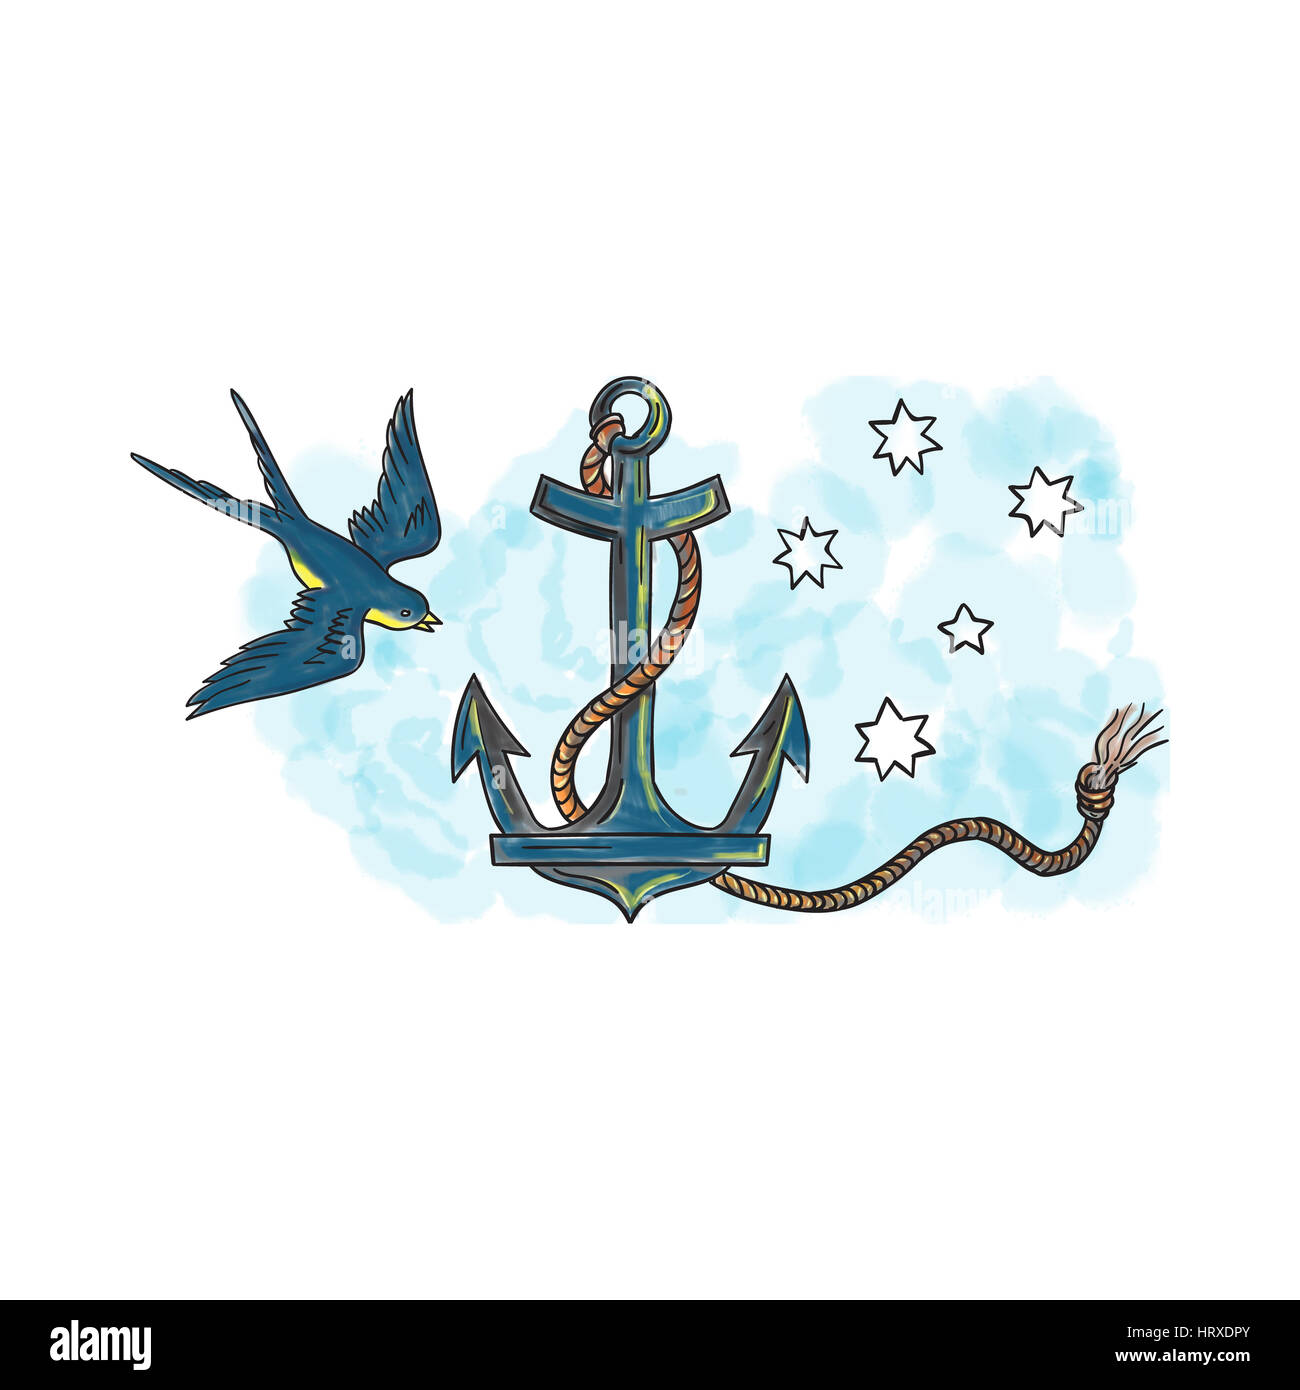 Tattoo style illustration of an anchor, a device, made of metal, used to connect a vessel to sea bed to prevent the craft from drifting, with coiled r Stock Photo